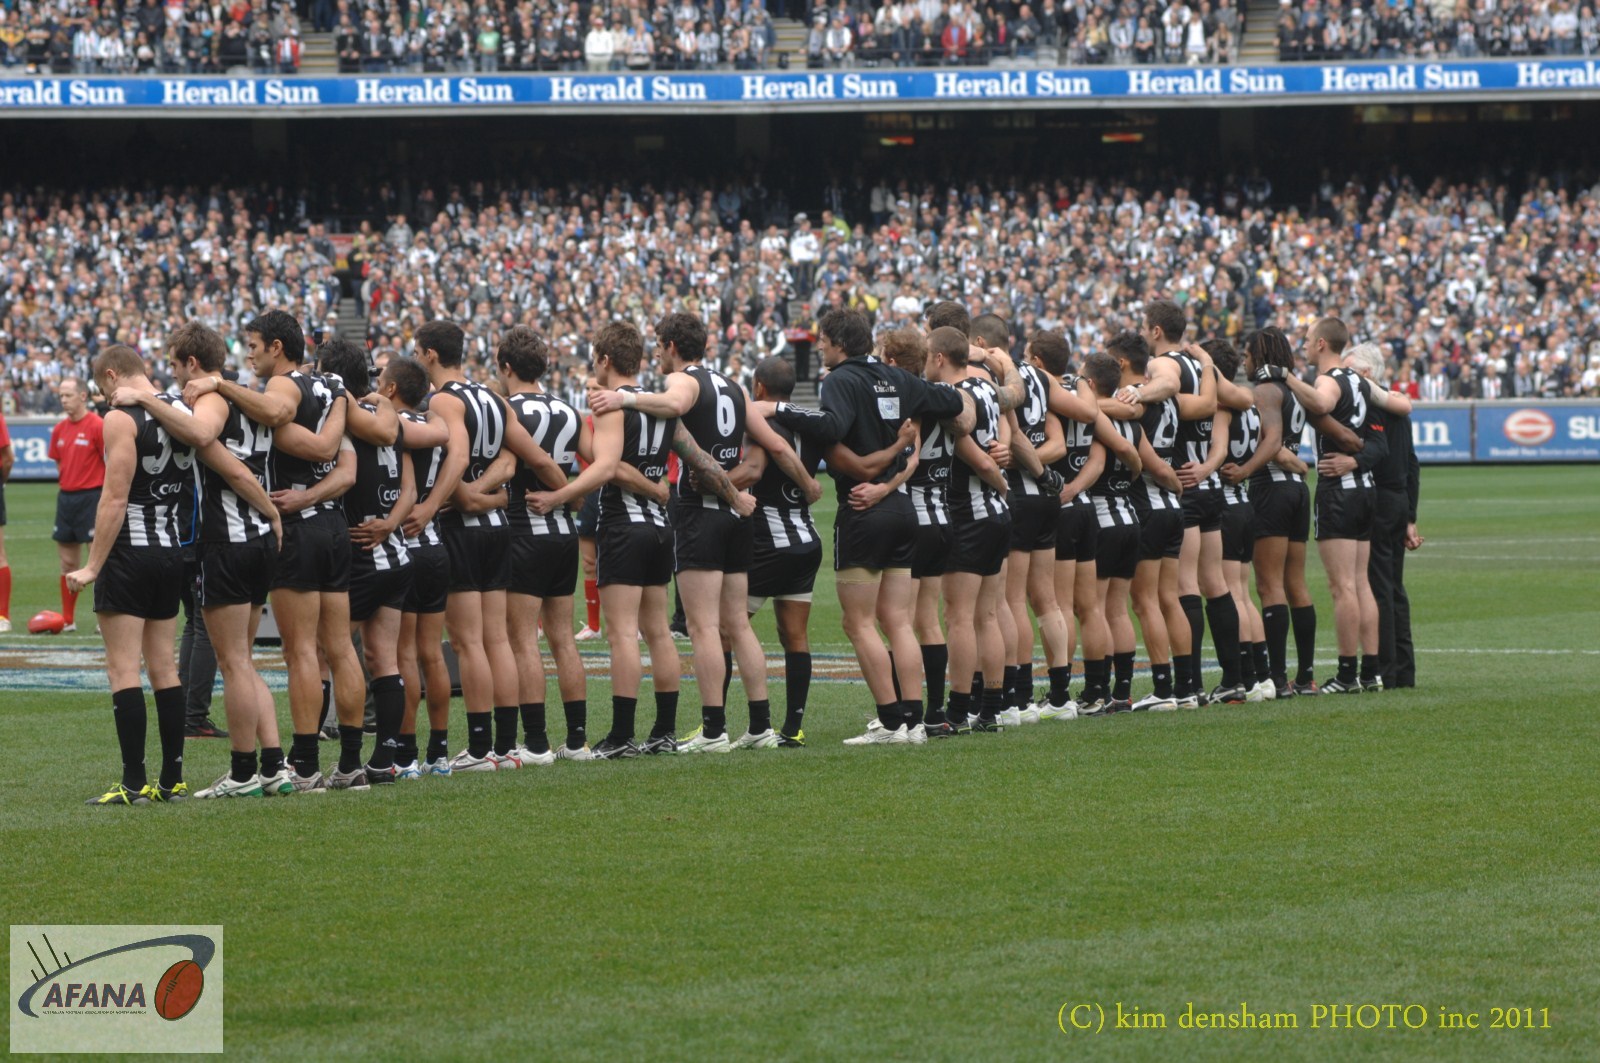 The Mighty Pies